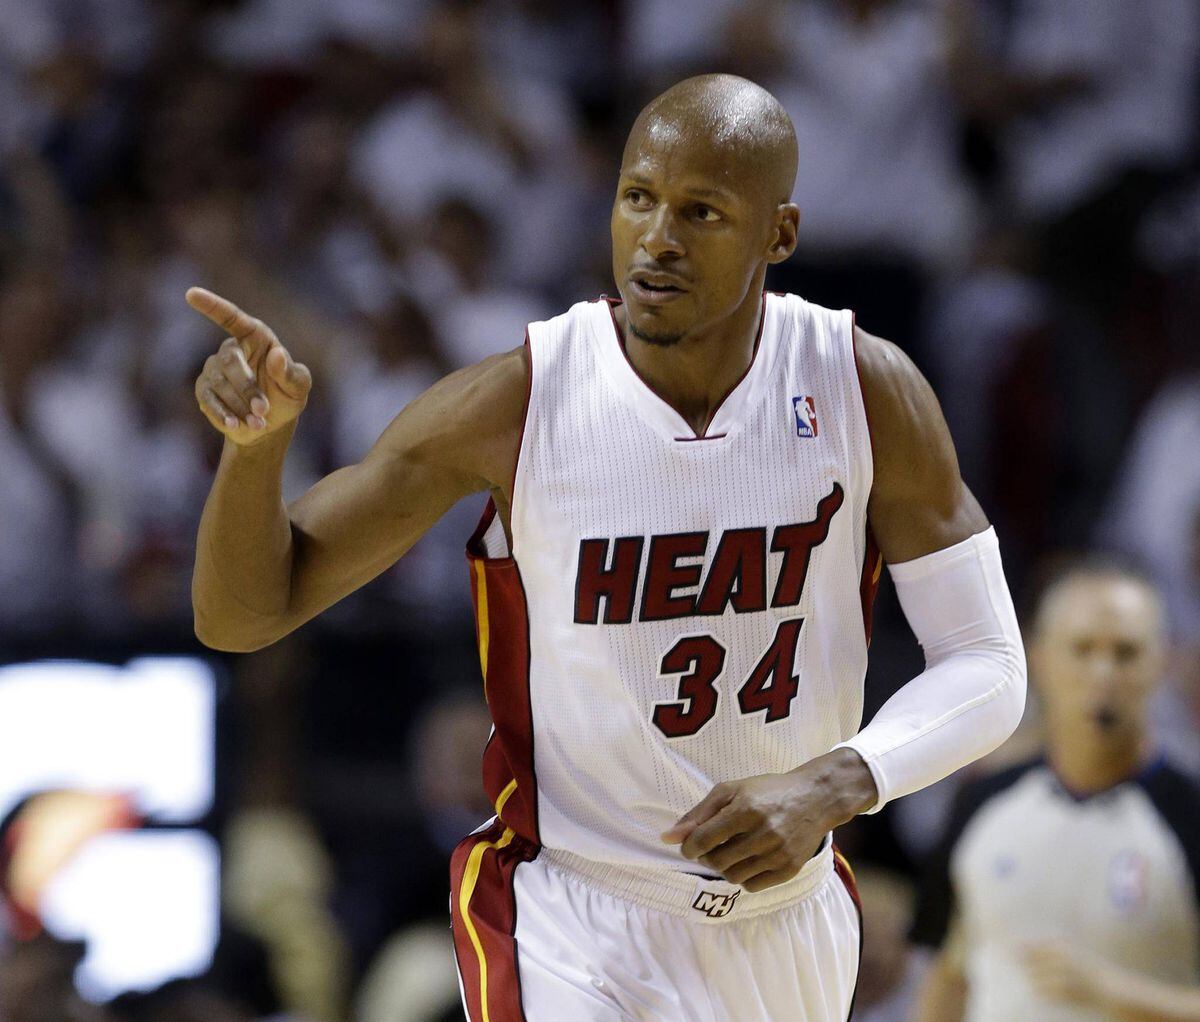 Ray Allen, the NBA’s all-time leader in 3-point shots made, retires - The Globe and Mail1200 x 1022